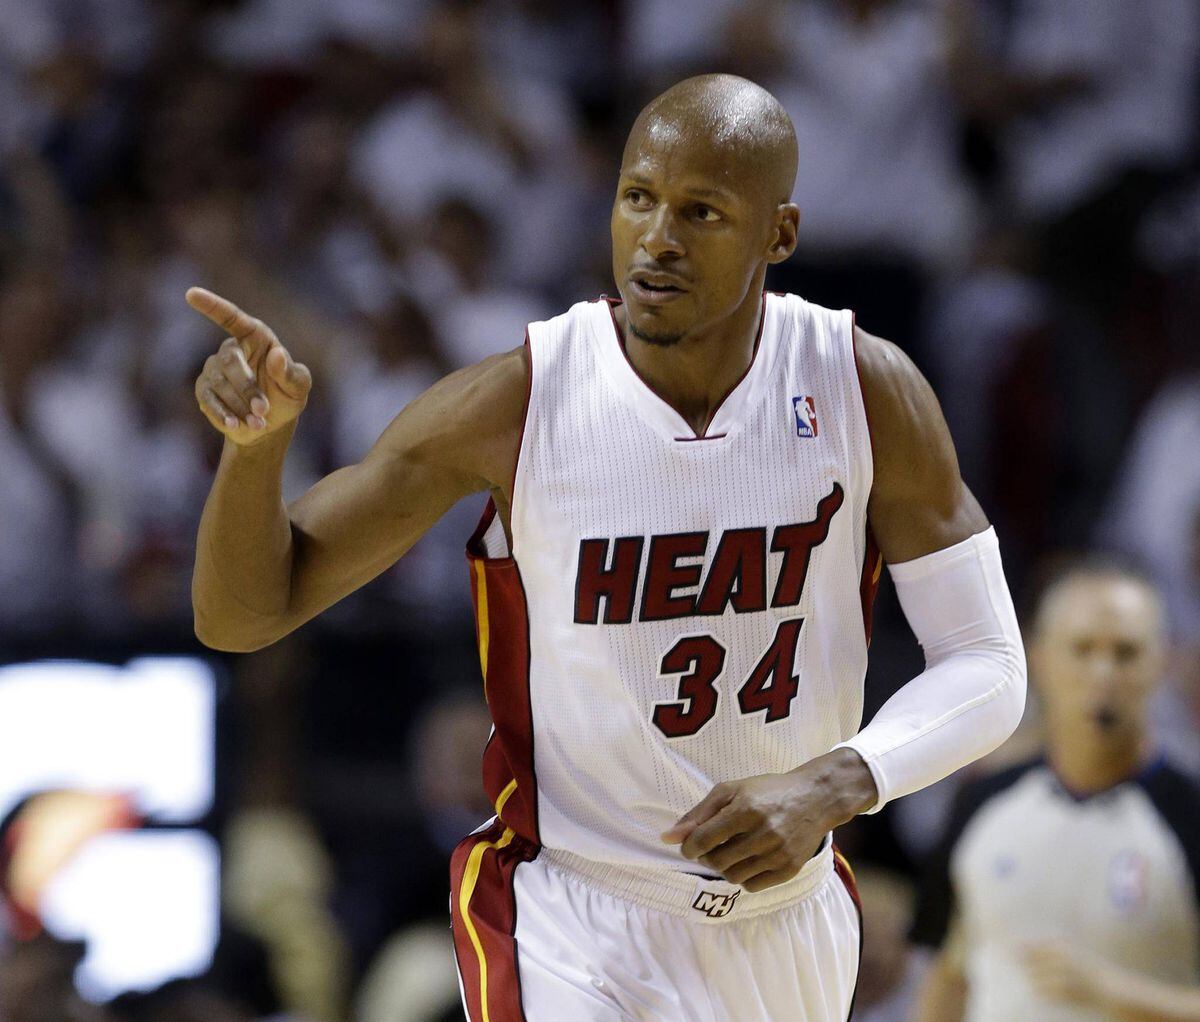 Ray Allen, the NBA’s all-time leader in 3-point shots made, retires - The Globe and Mail1200 x 1022